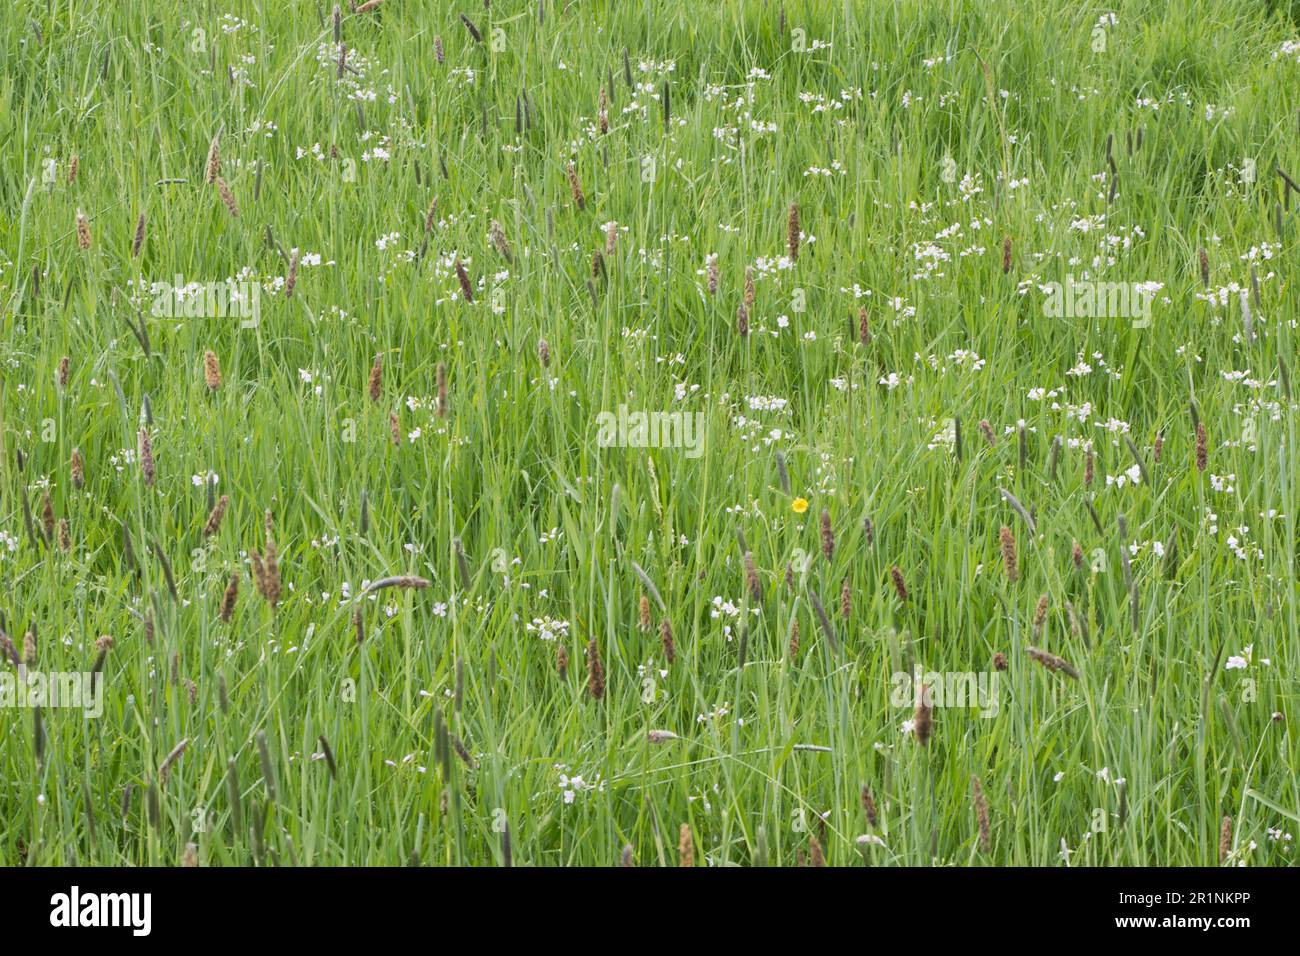 Meadow with meadow foxtail (Alopecurus pratensis) and meadow foamwort (Cardamine pratensis), Bremen, Germany Stock Photo